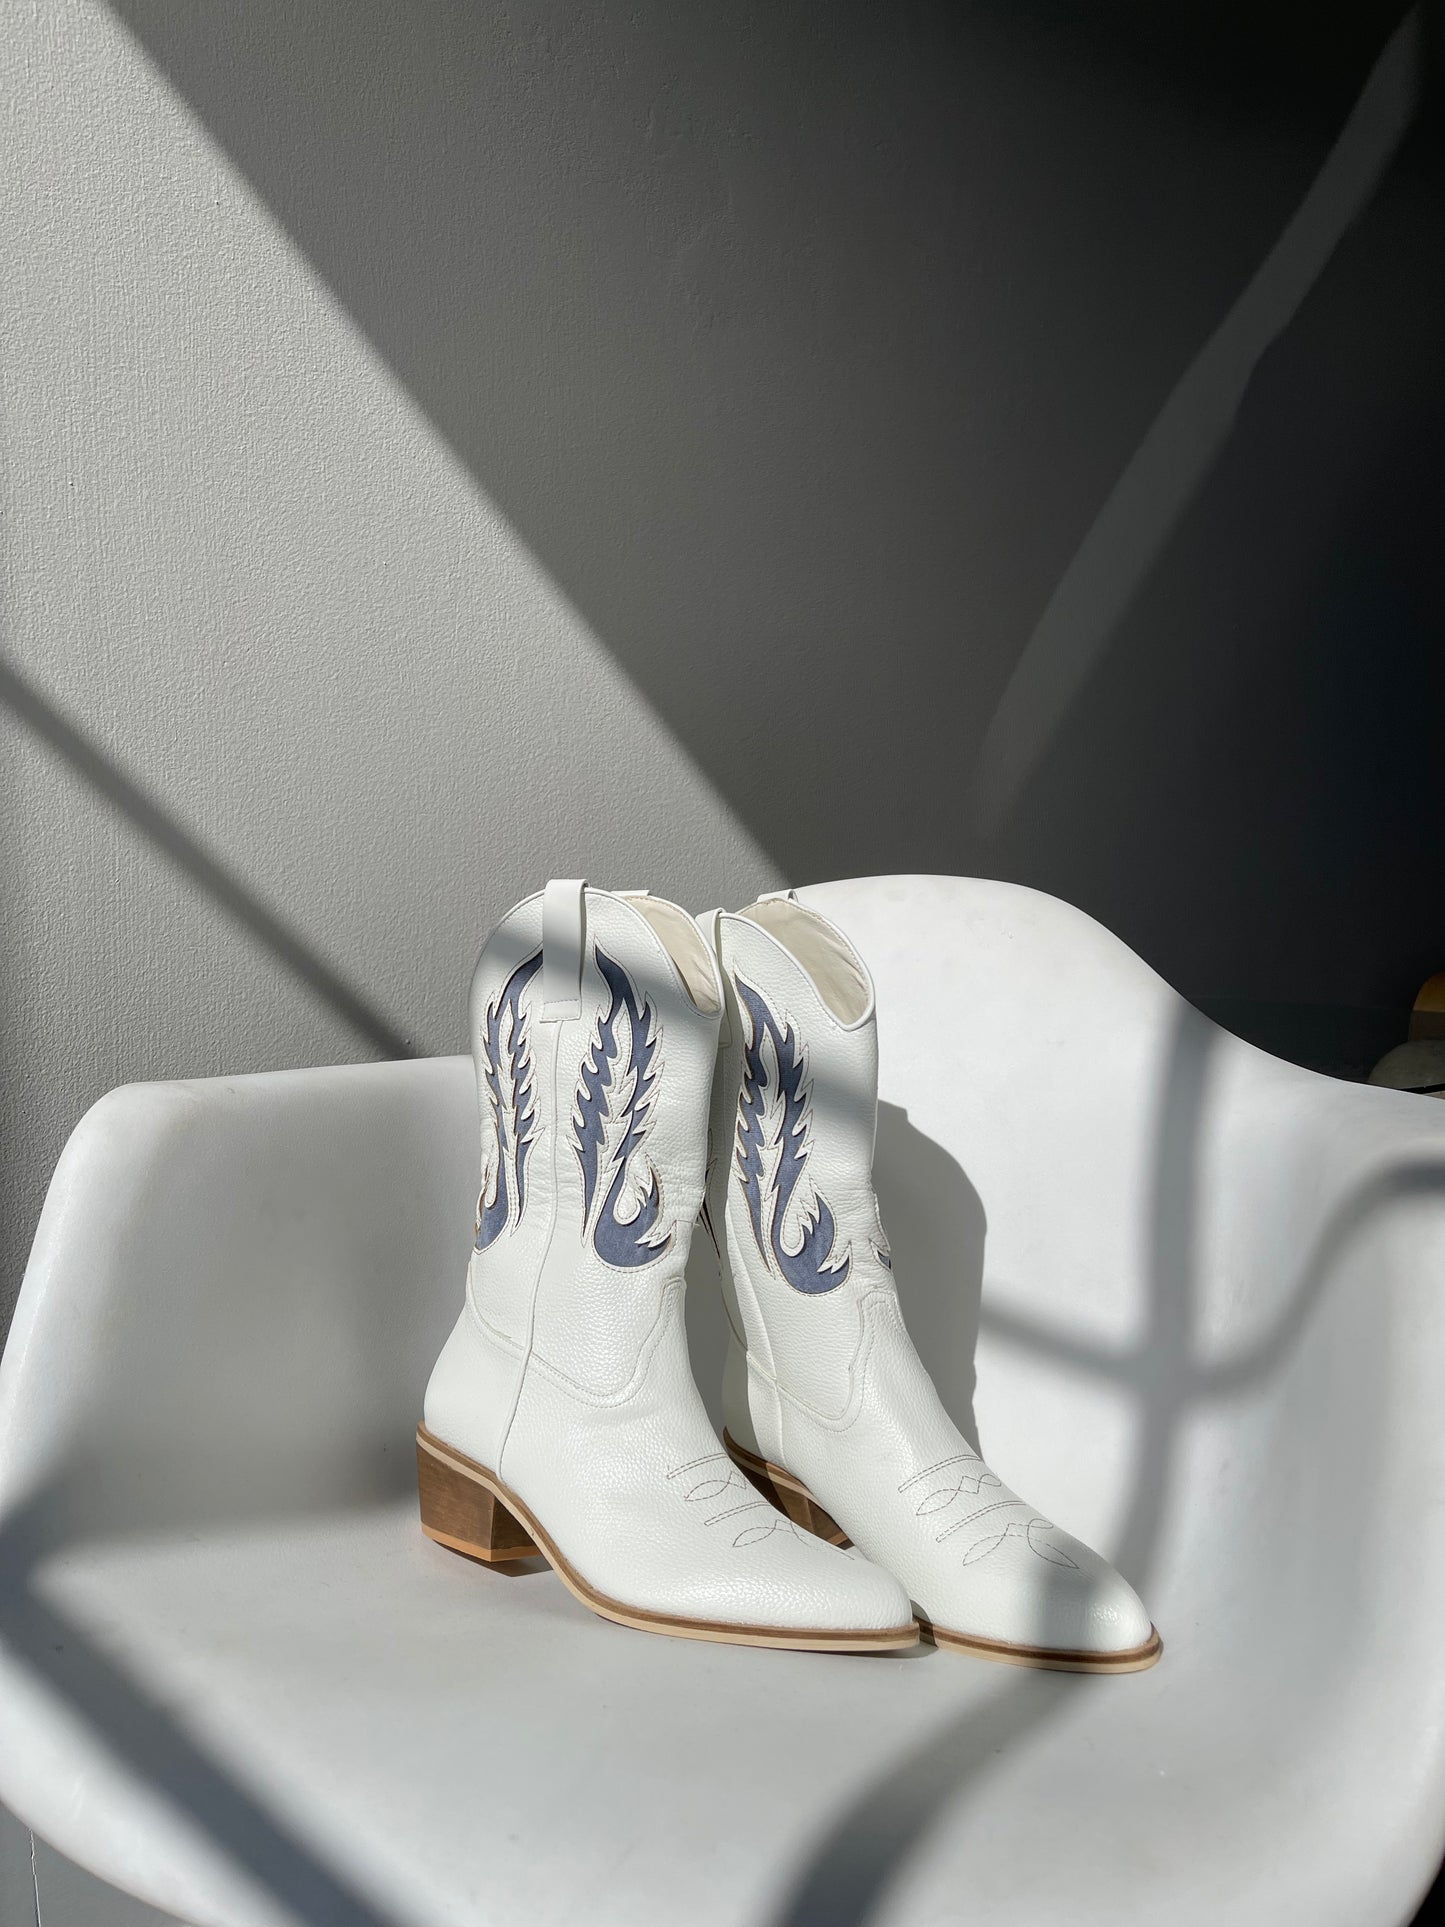 Wesley Classic Western Style Cowboy Boot In White Denim